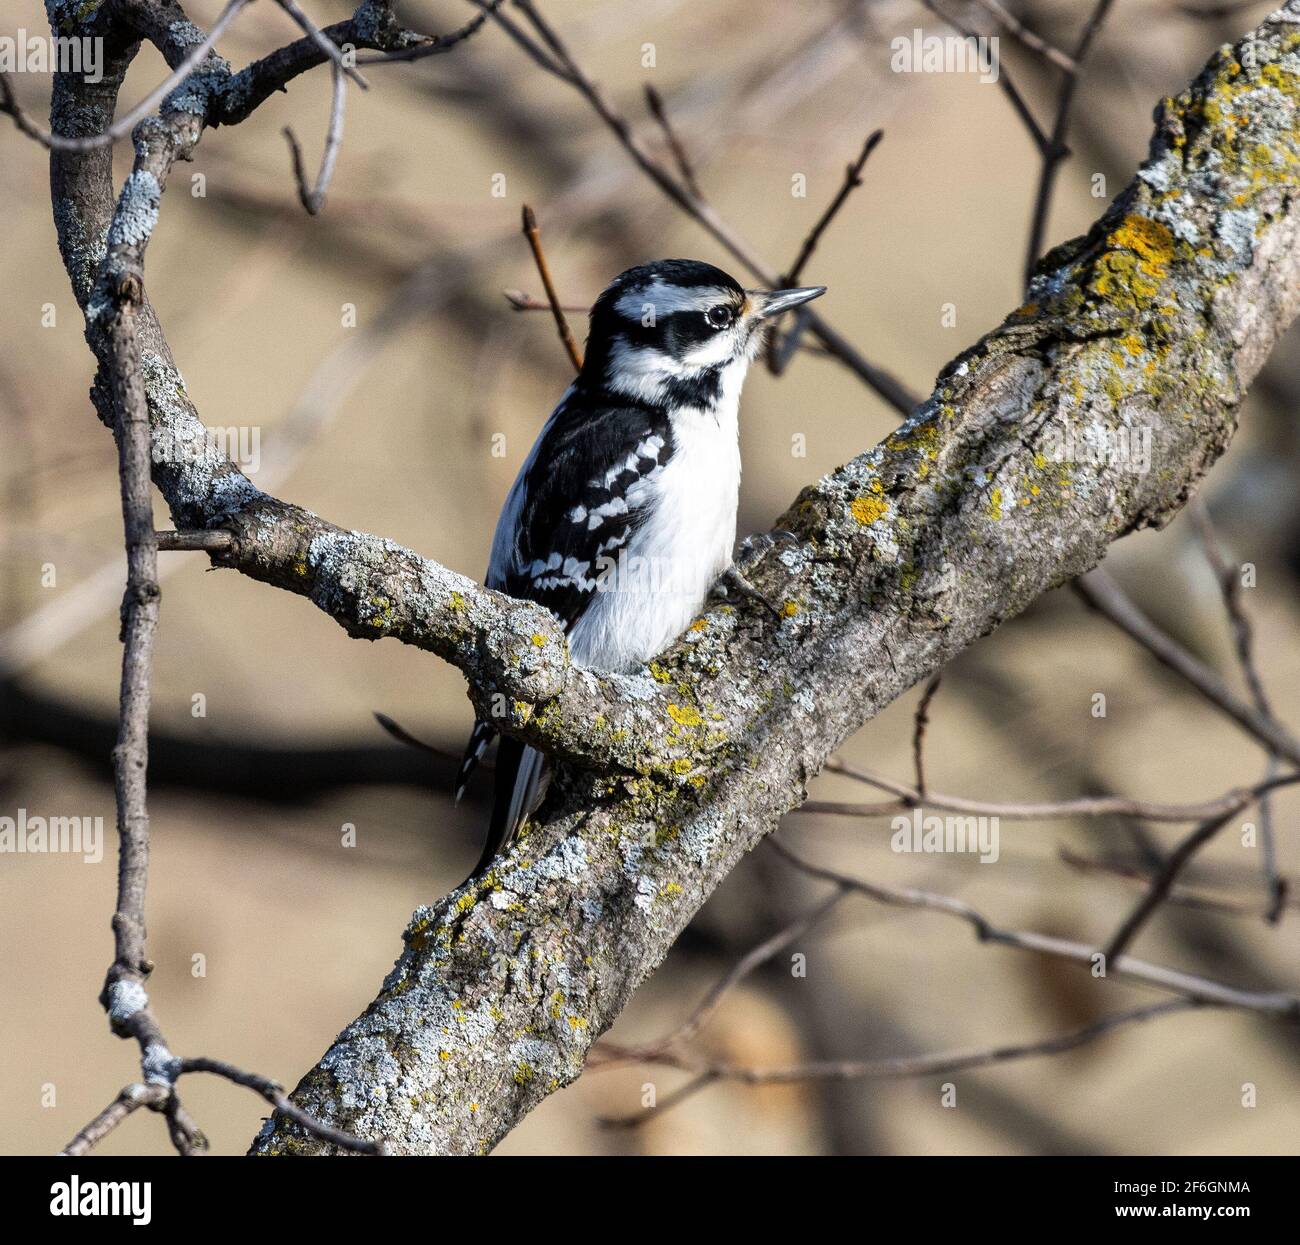 Female Downy Woodpecker Perched on Tree Branch Stock Photo